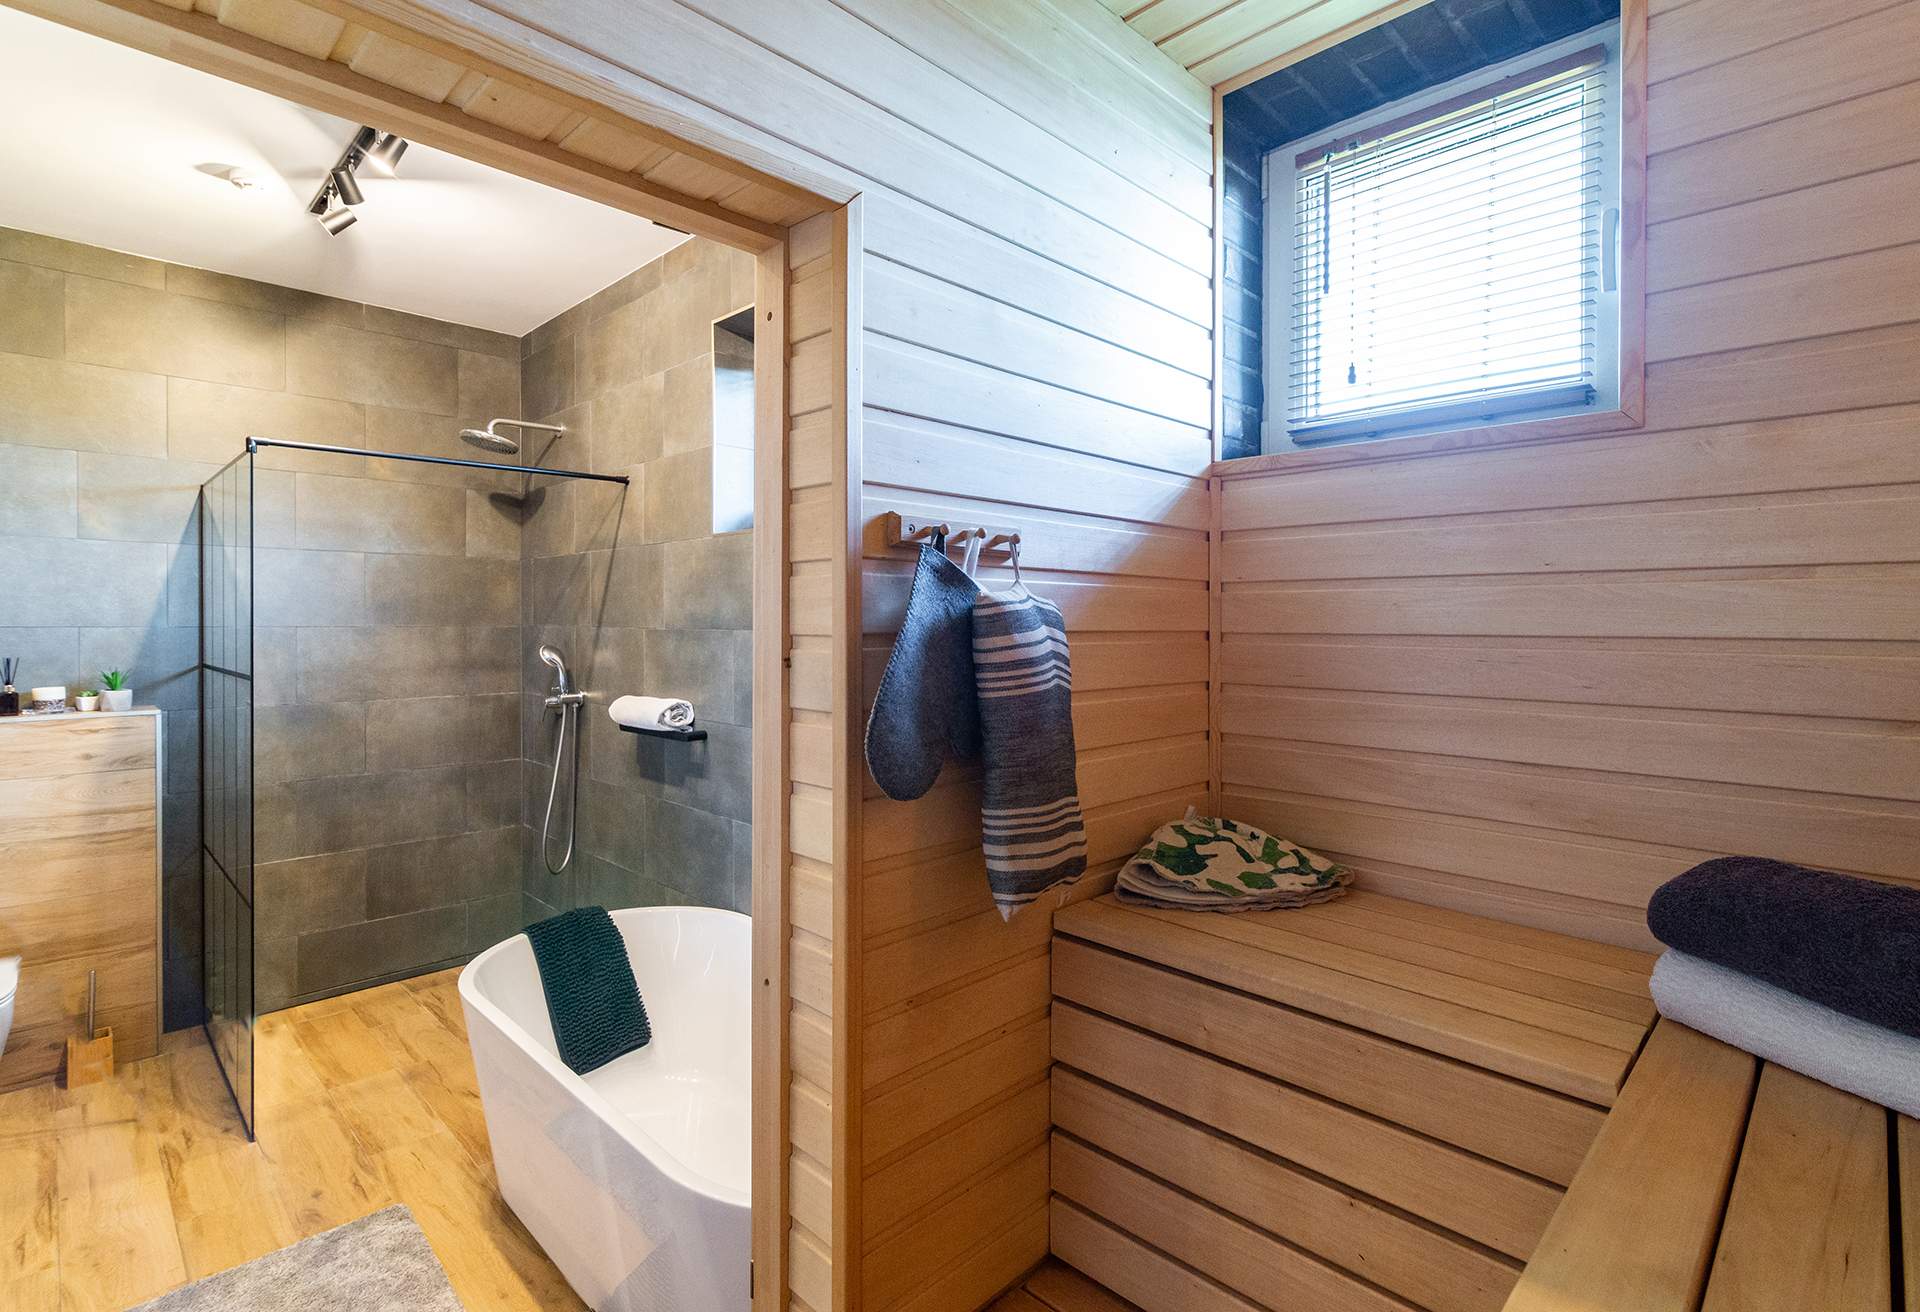 Modern hotel bathroom with sauna attached to the room